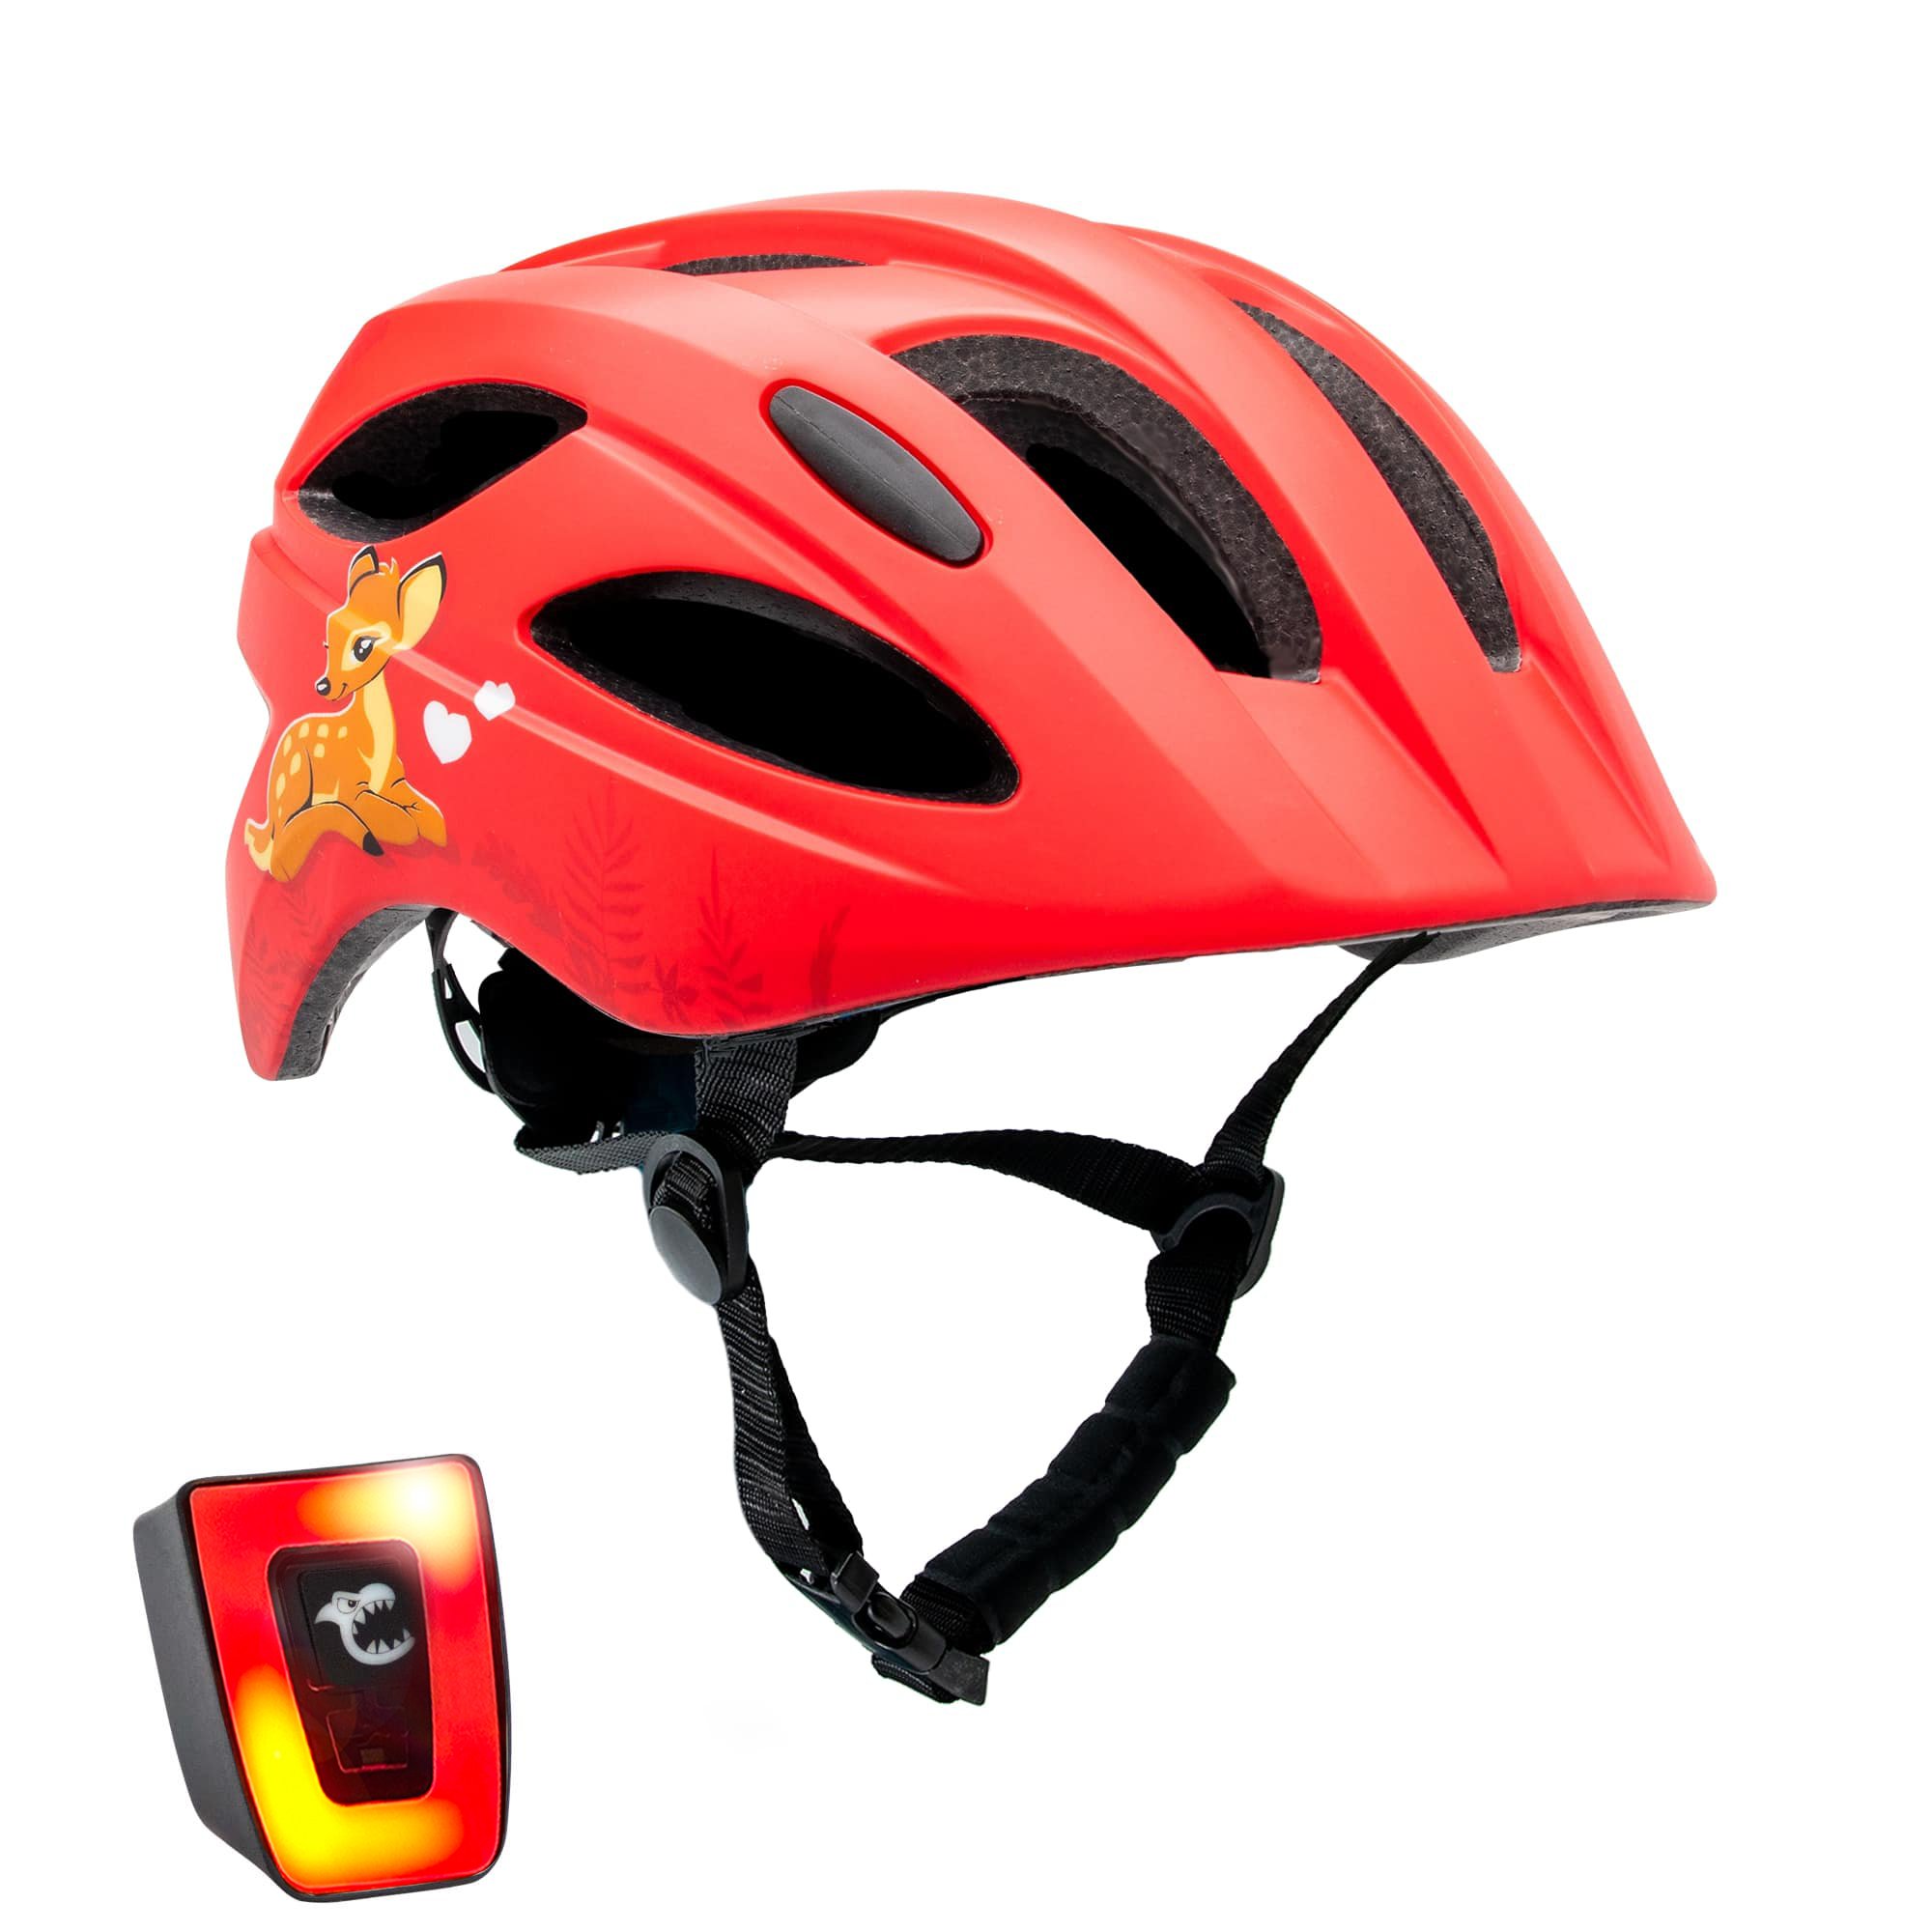 Crazy Safety - Cute Bicycle Helmet - Red (160101-09-01)